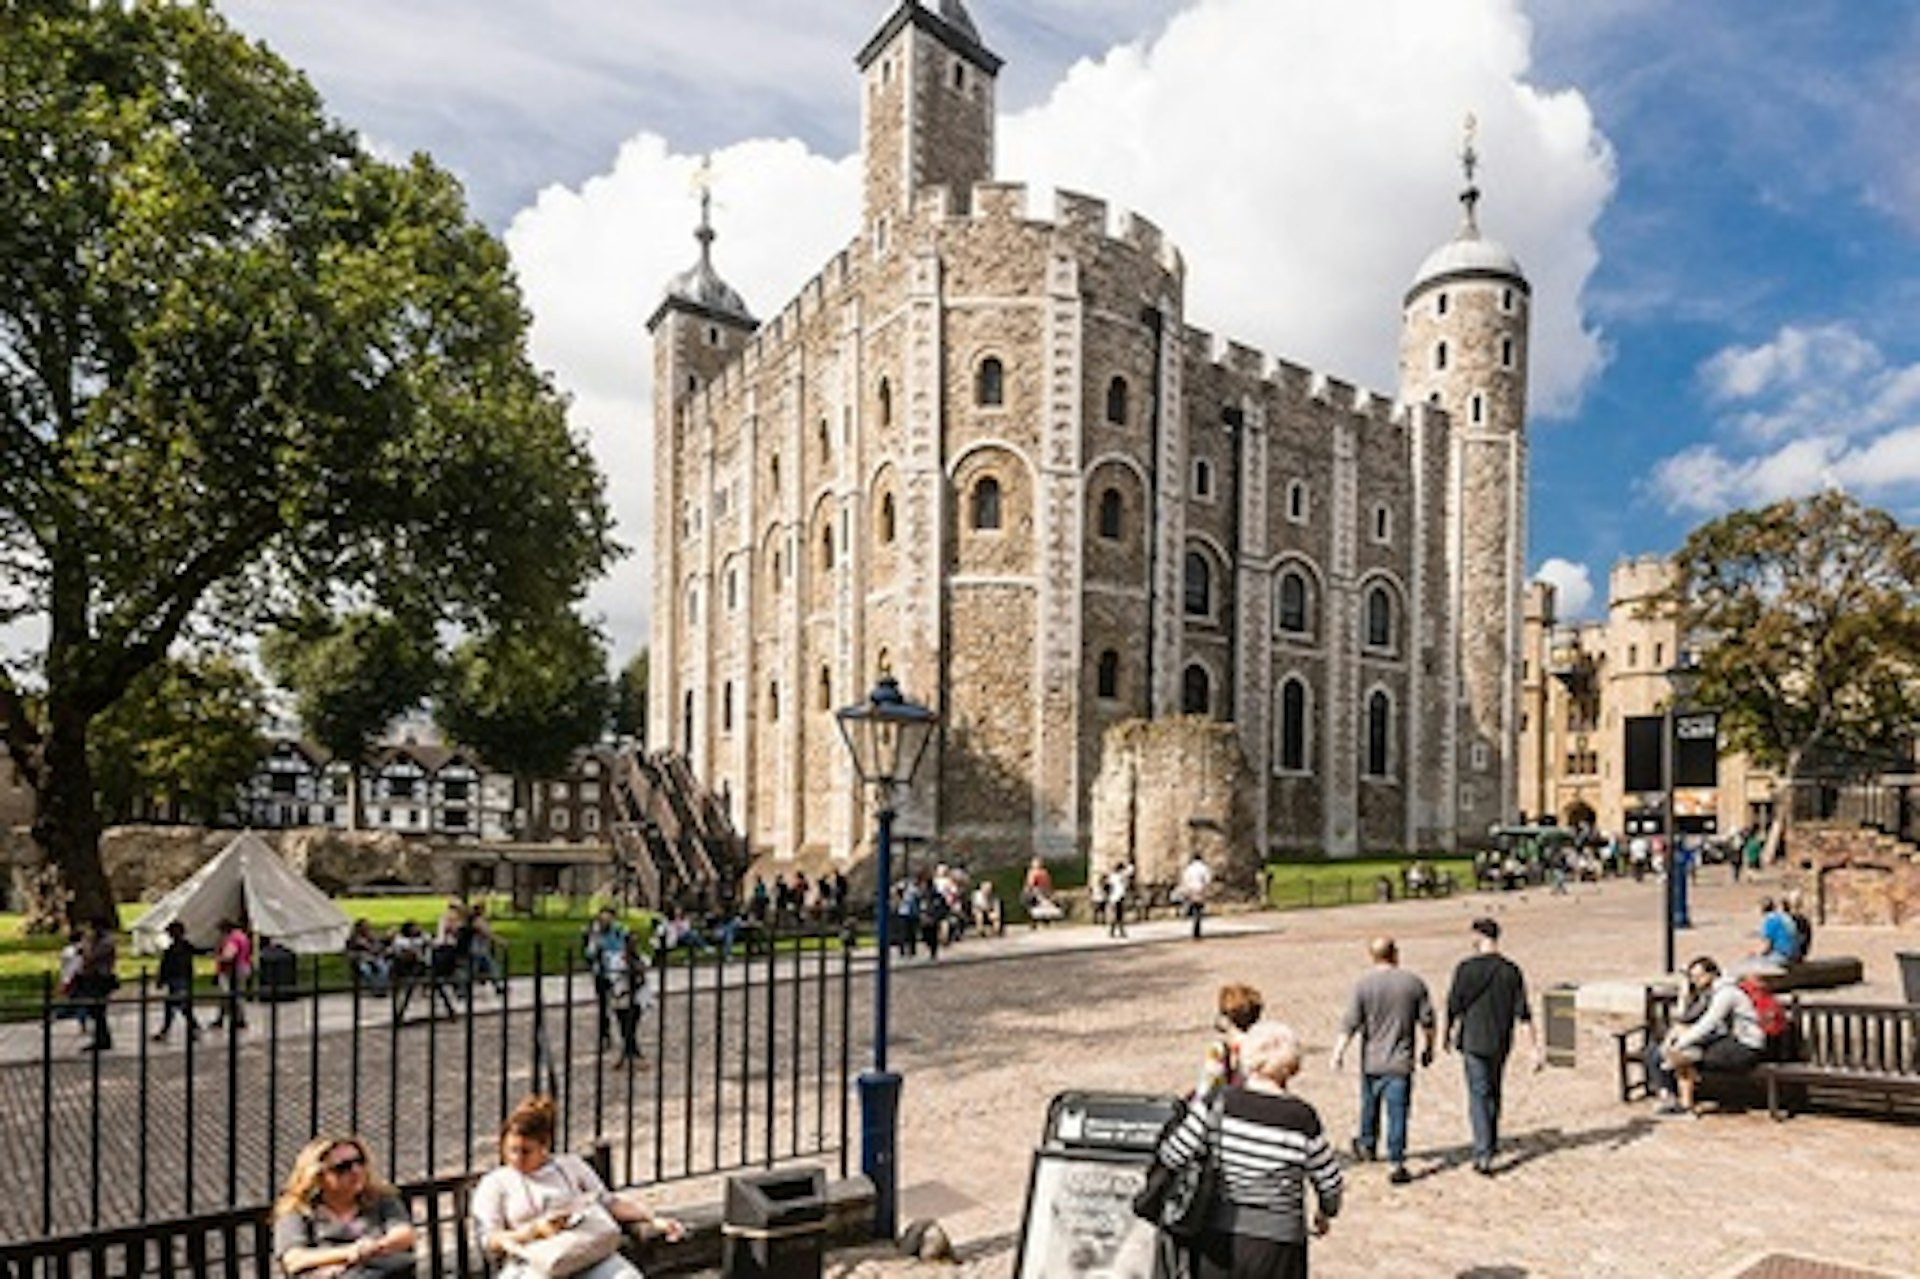 Visit the Tower of London for One Adult and One Child